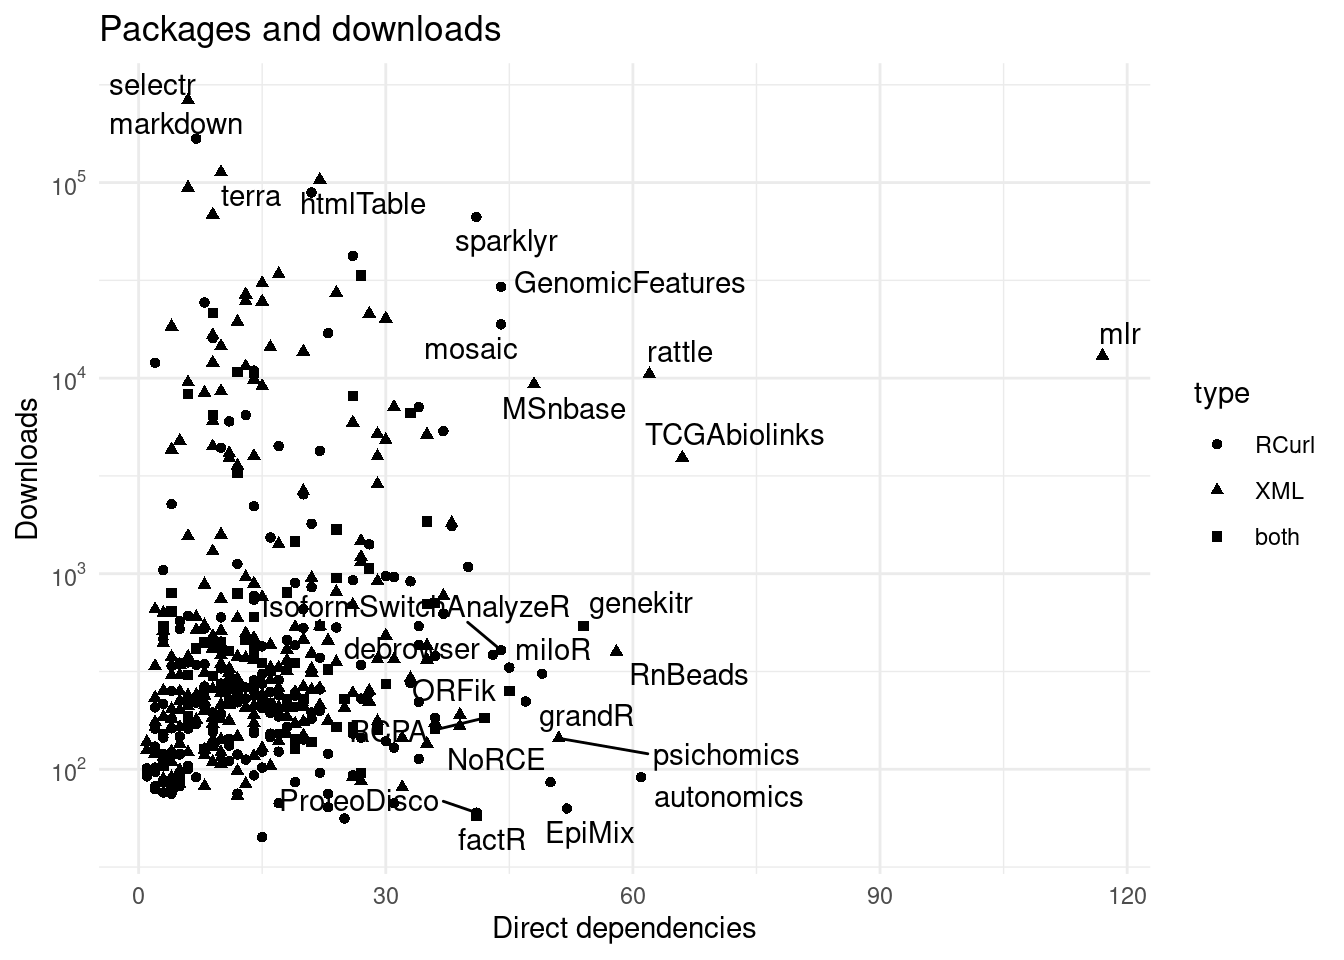 Direct dependencies vs downloads. Many pakcages have up to 50 packages and most have below 1000 downloads in a month.